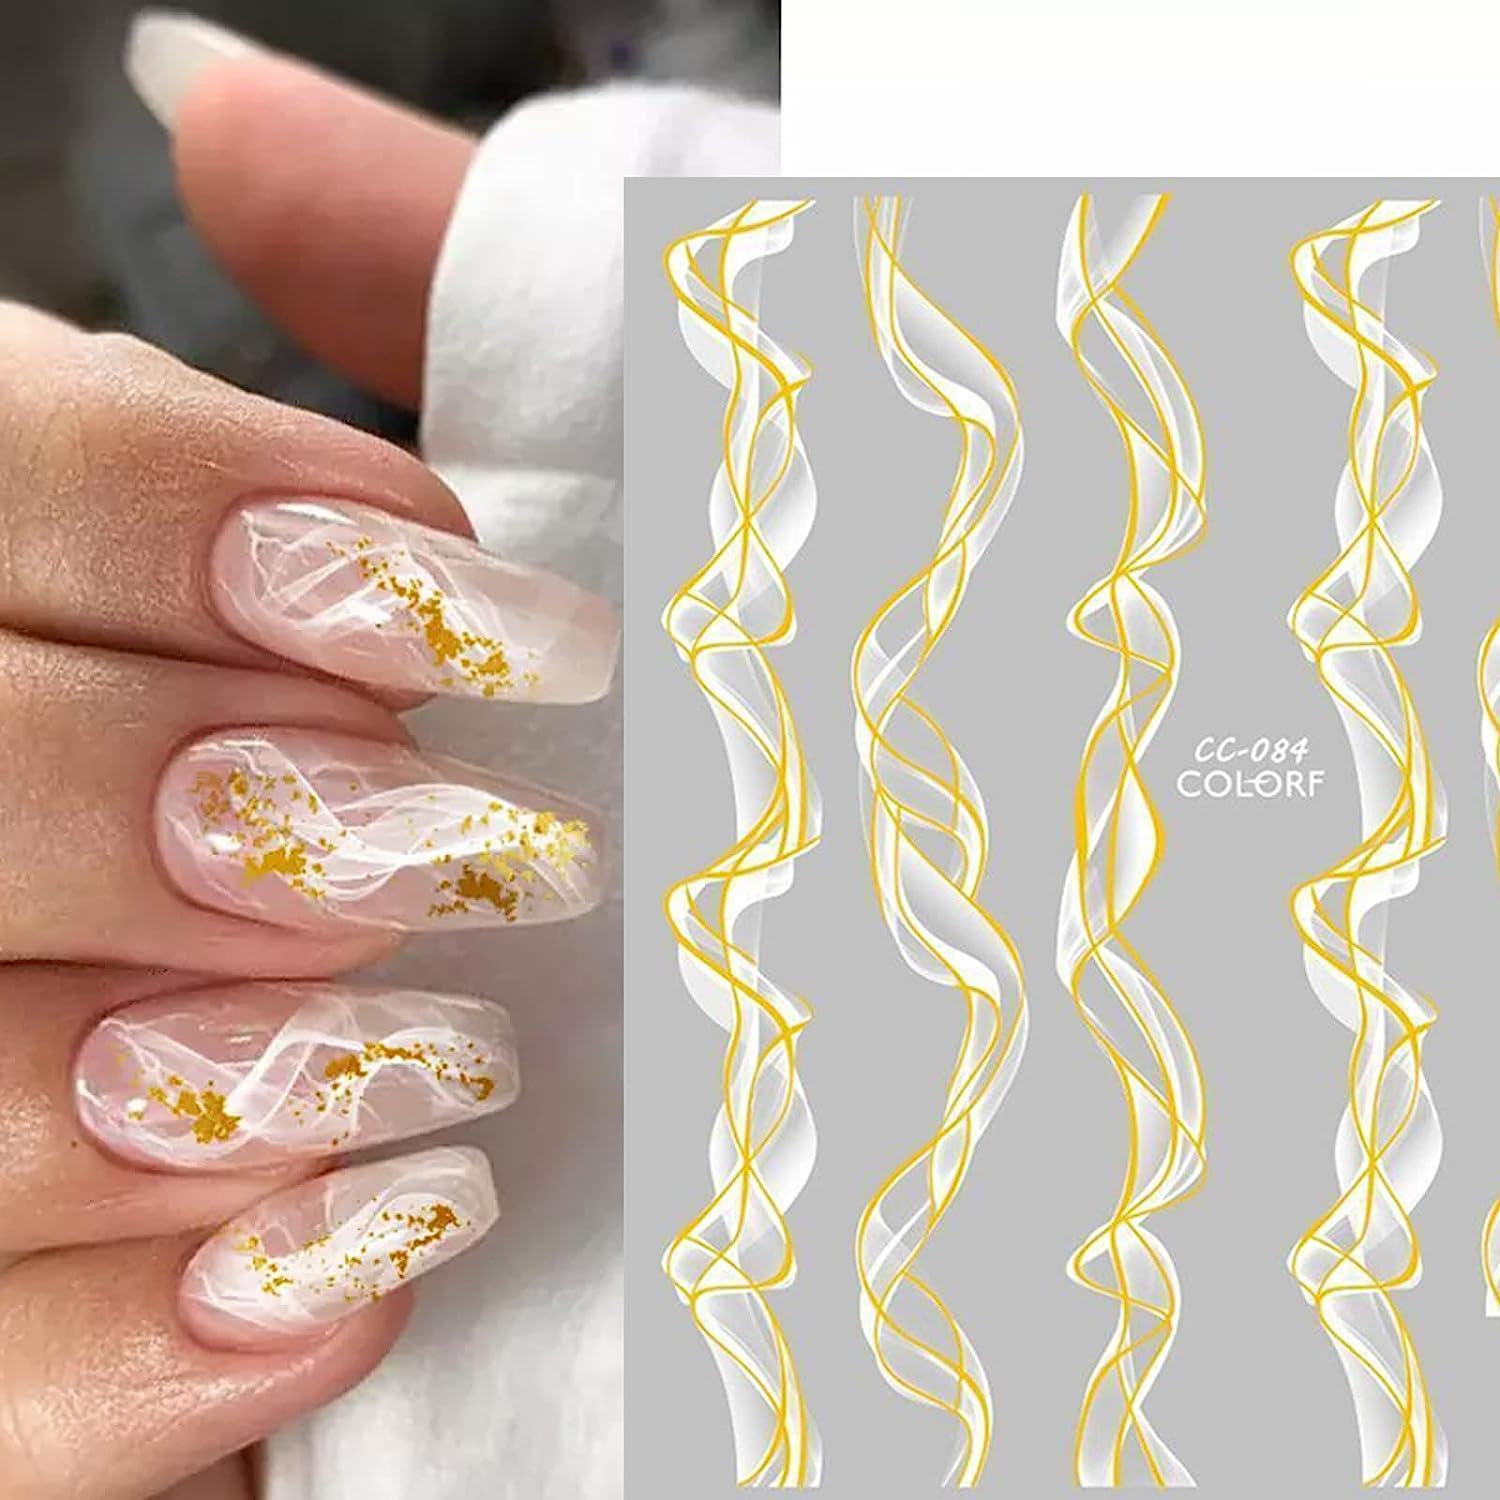 16 White and Gold Nails Perfect for Any Occasion - Beautiful Dawn Designs |  Acrylic nails almond shape, Stylish nails, Gold nails